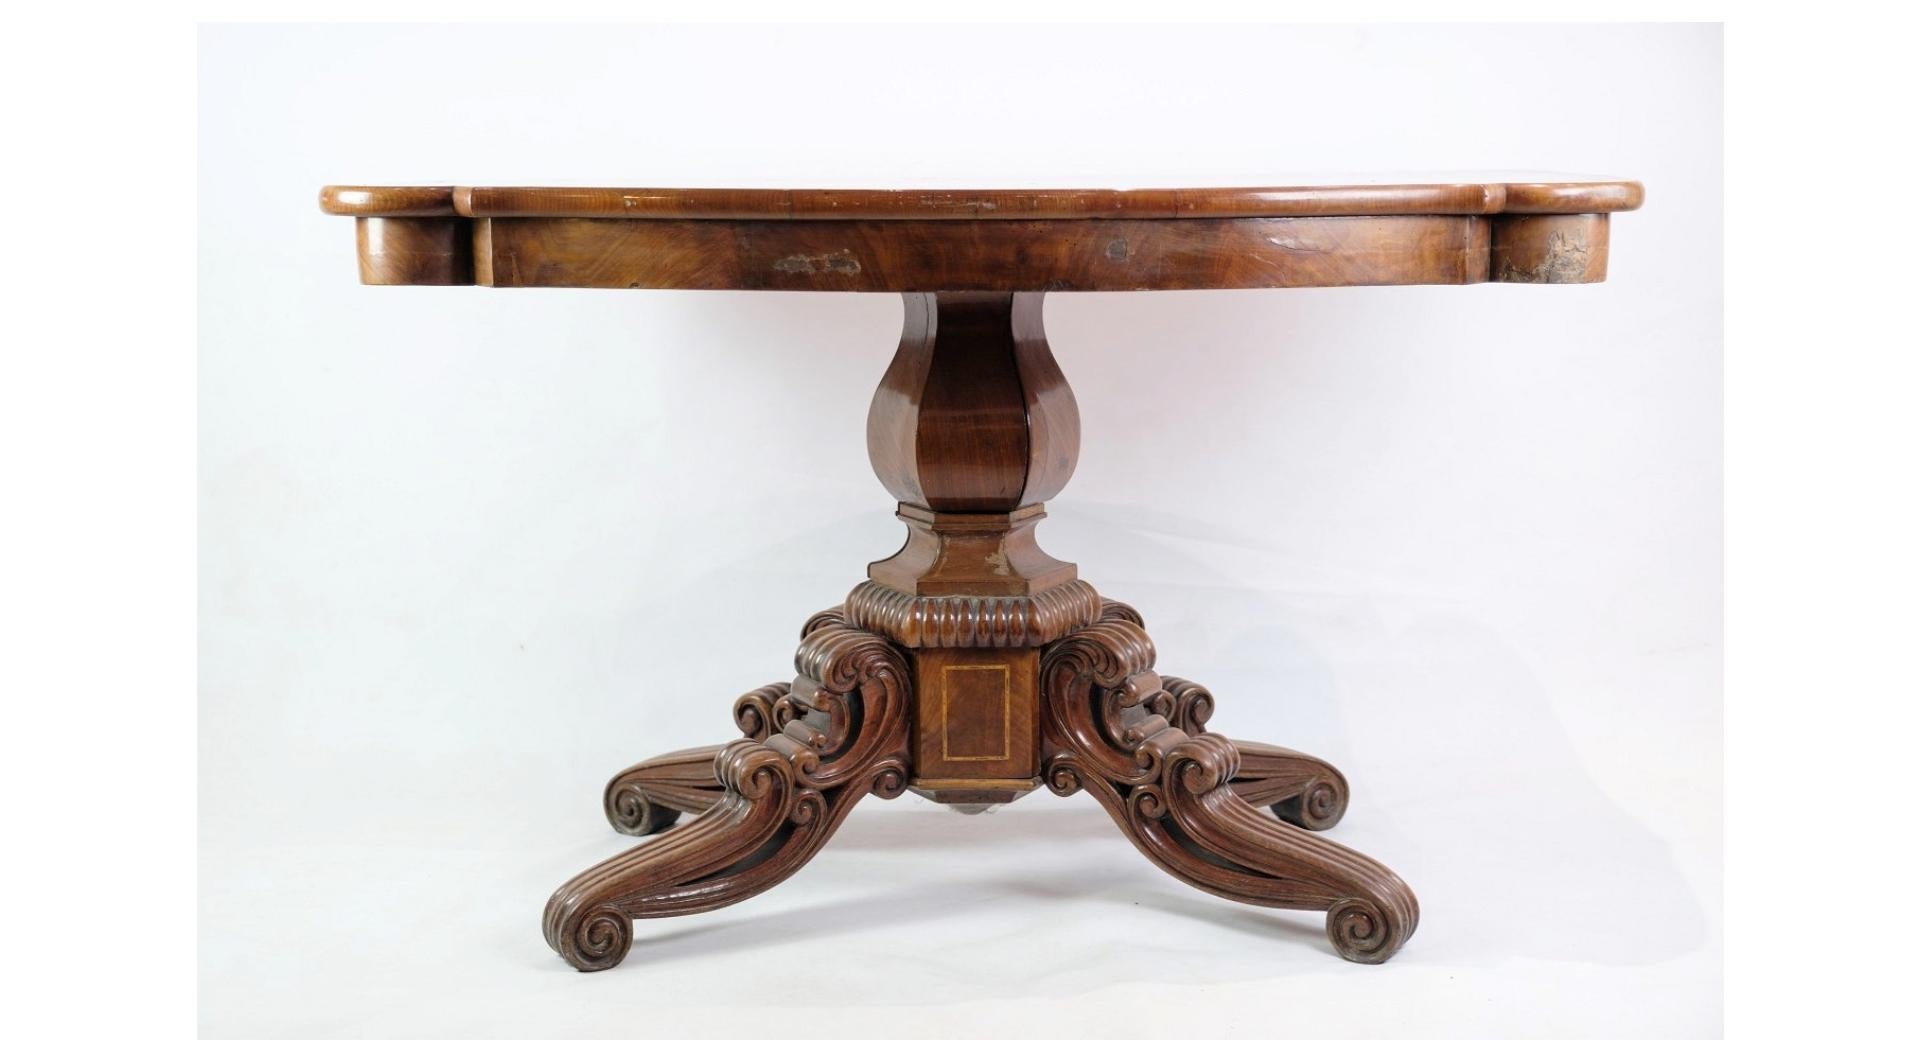 The late Empire column table from the 1840s is a magnificent example of furniture craftsmanship from that era. Crafted from rich mahogany, this table exudes elegance and sophistication, with its intricate carvings and attention to detail.

The